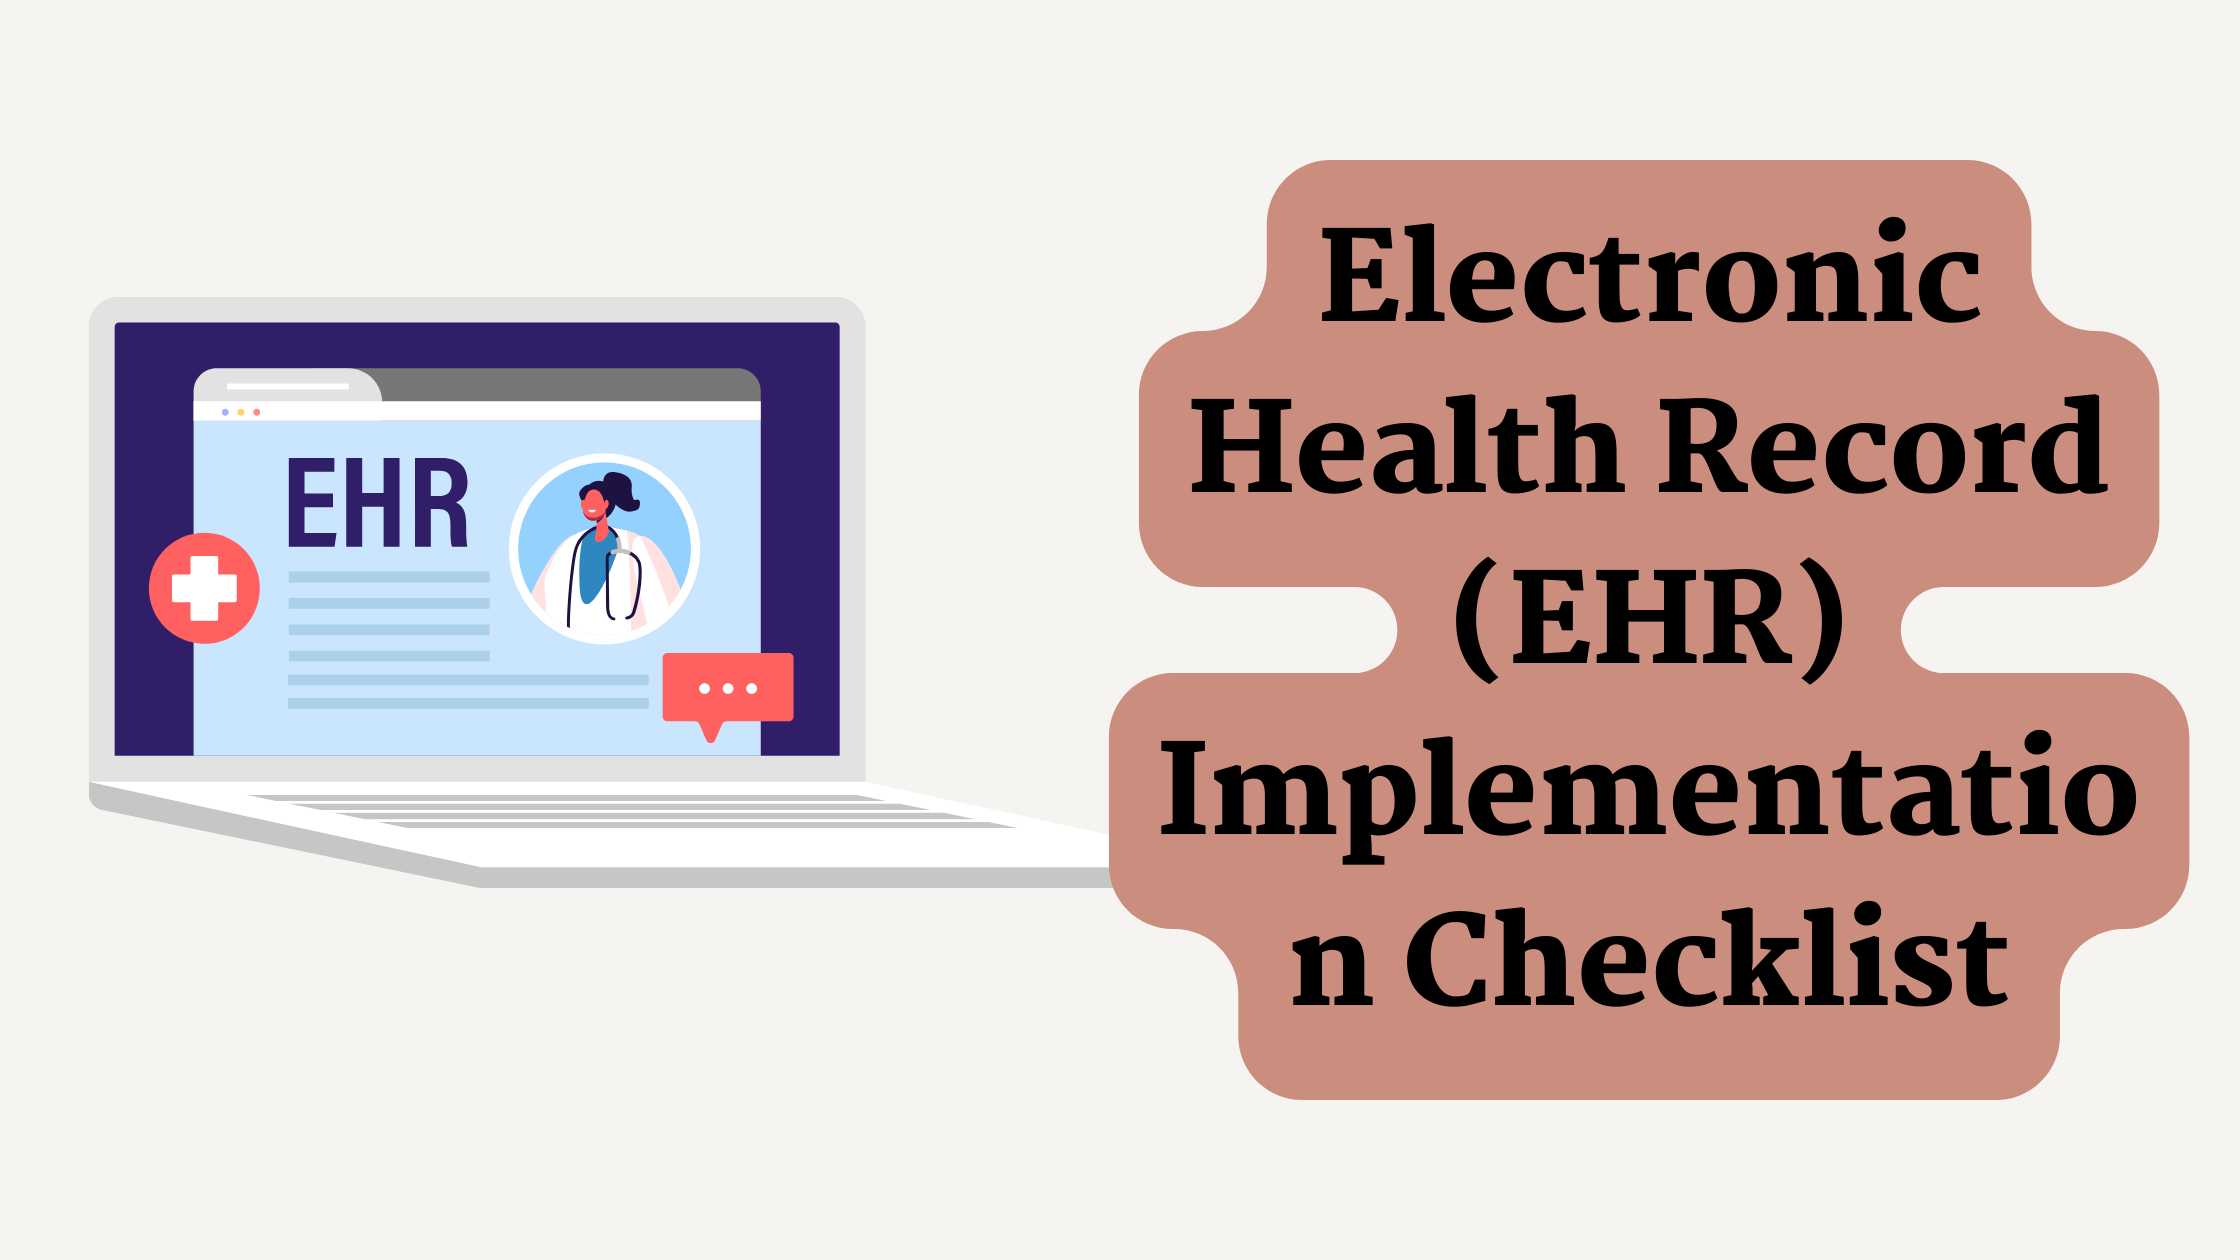 Electronic Health Record (EHR) Implementation Checklist